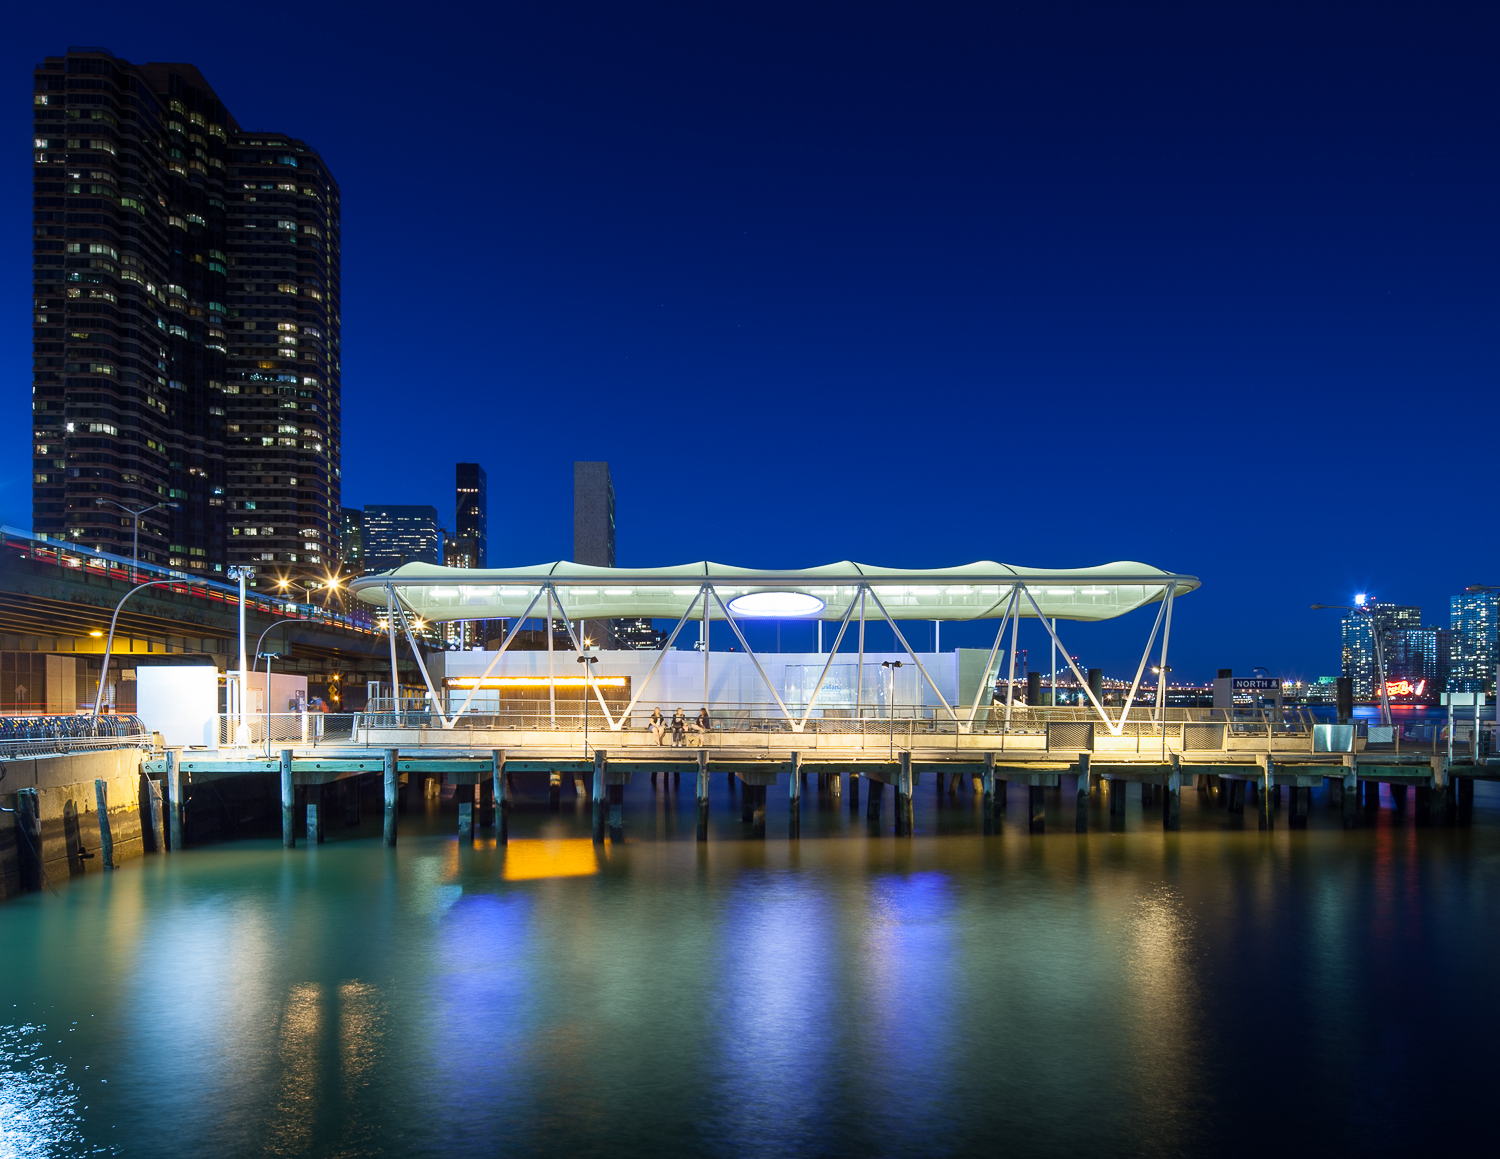  Project:&nbsp; 34th St Ferry Terminal  Location:&nbsp; New York, NY  Designed by:&nbsp;  Kennedy &amp; Violich   